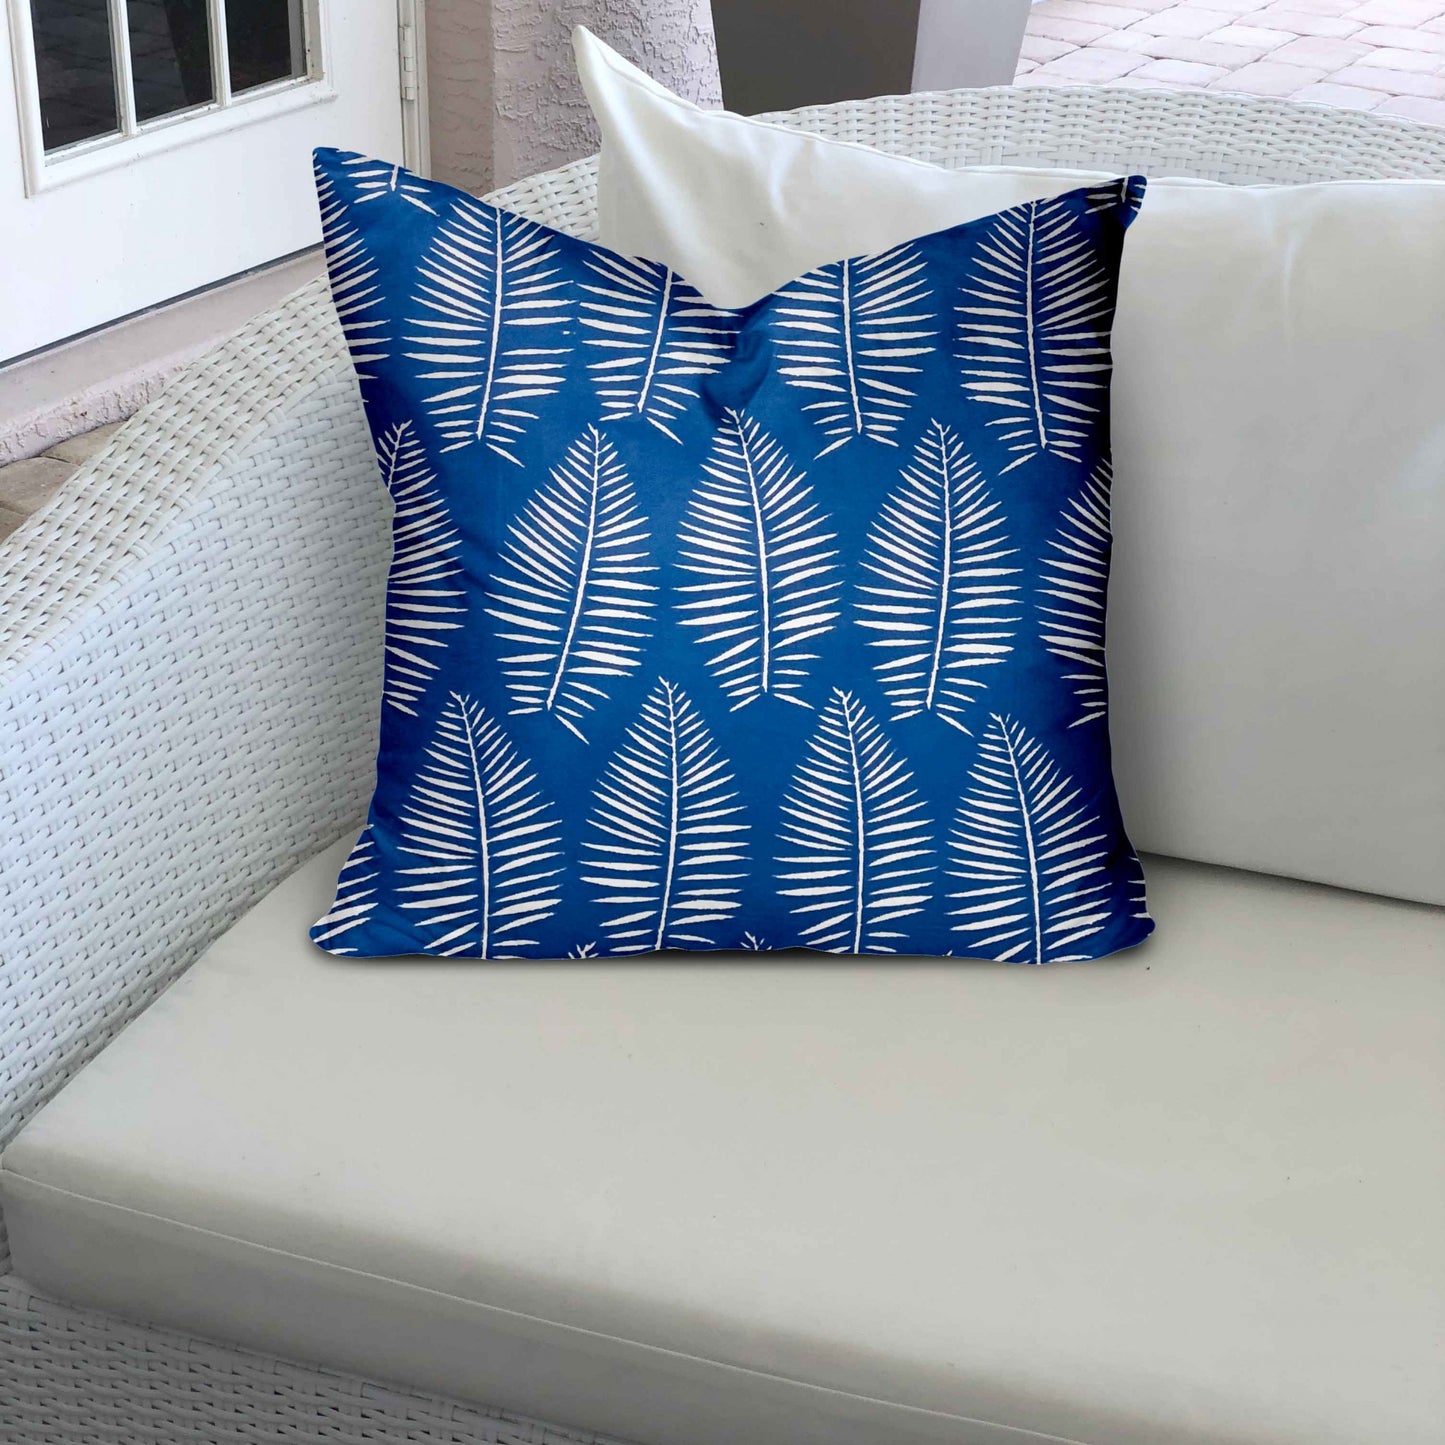 16" X 16" Blue And White Enveloped Tropical Throw Indoor Outdoor Pillow